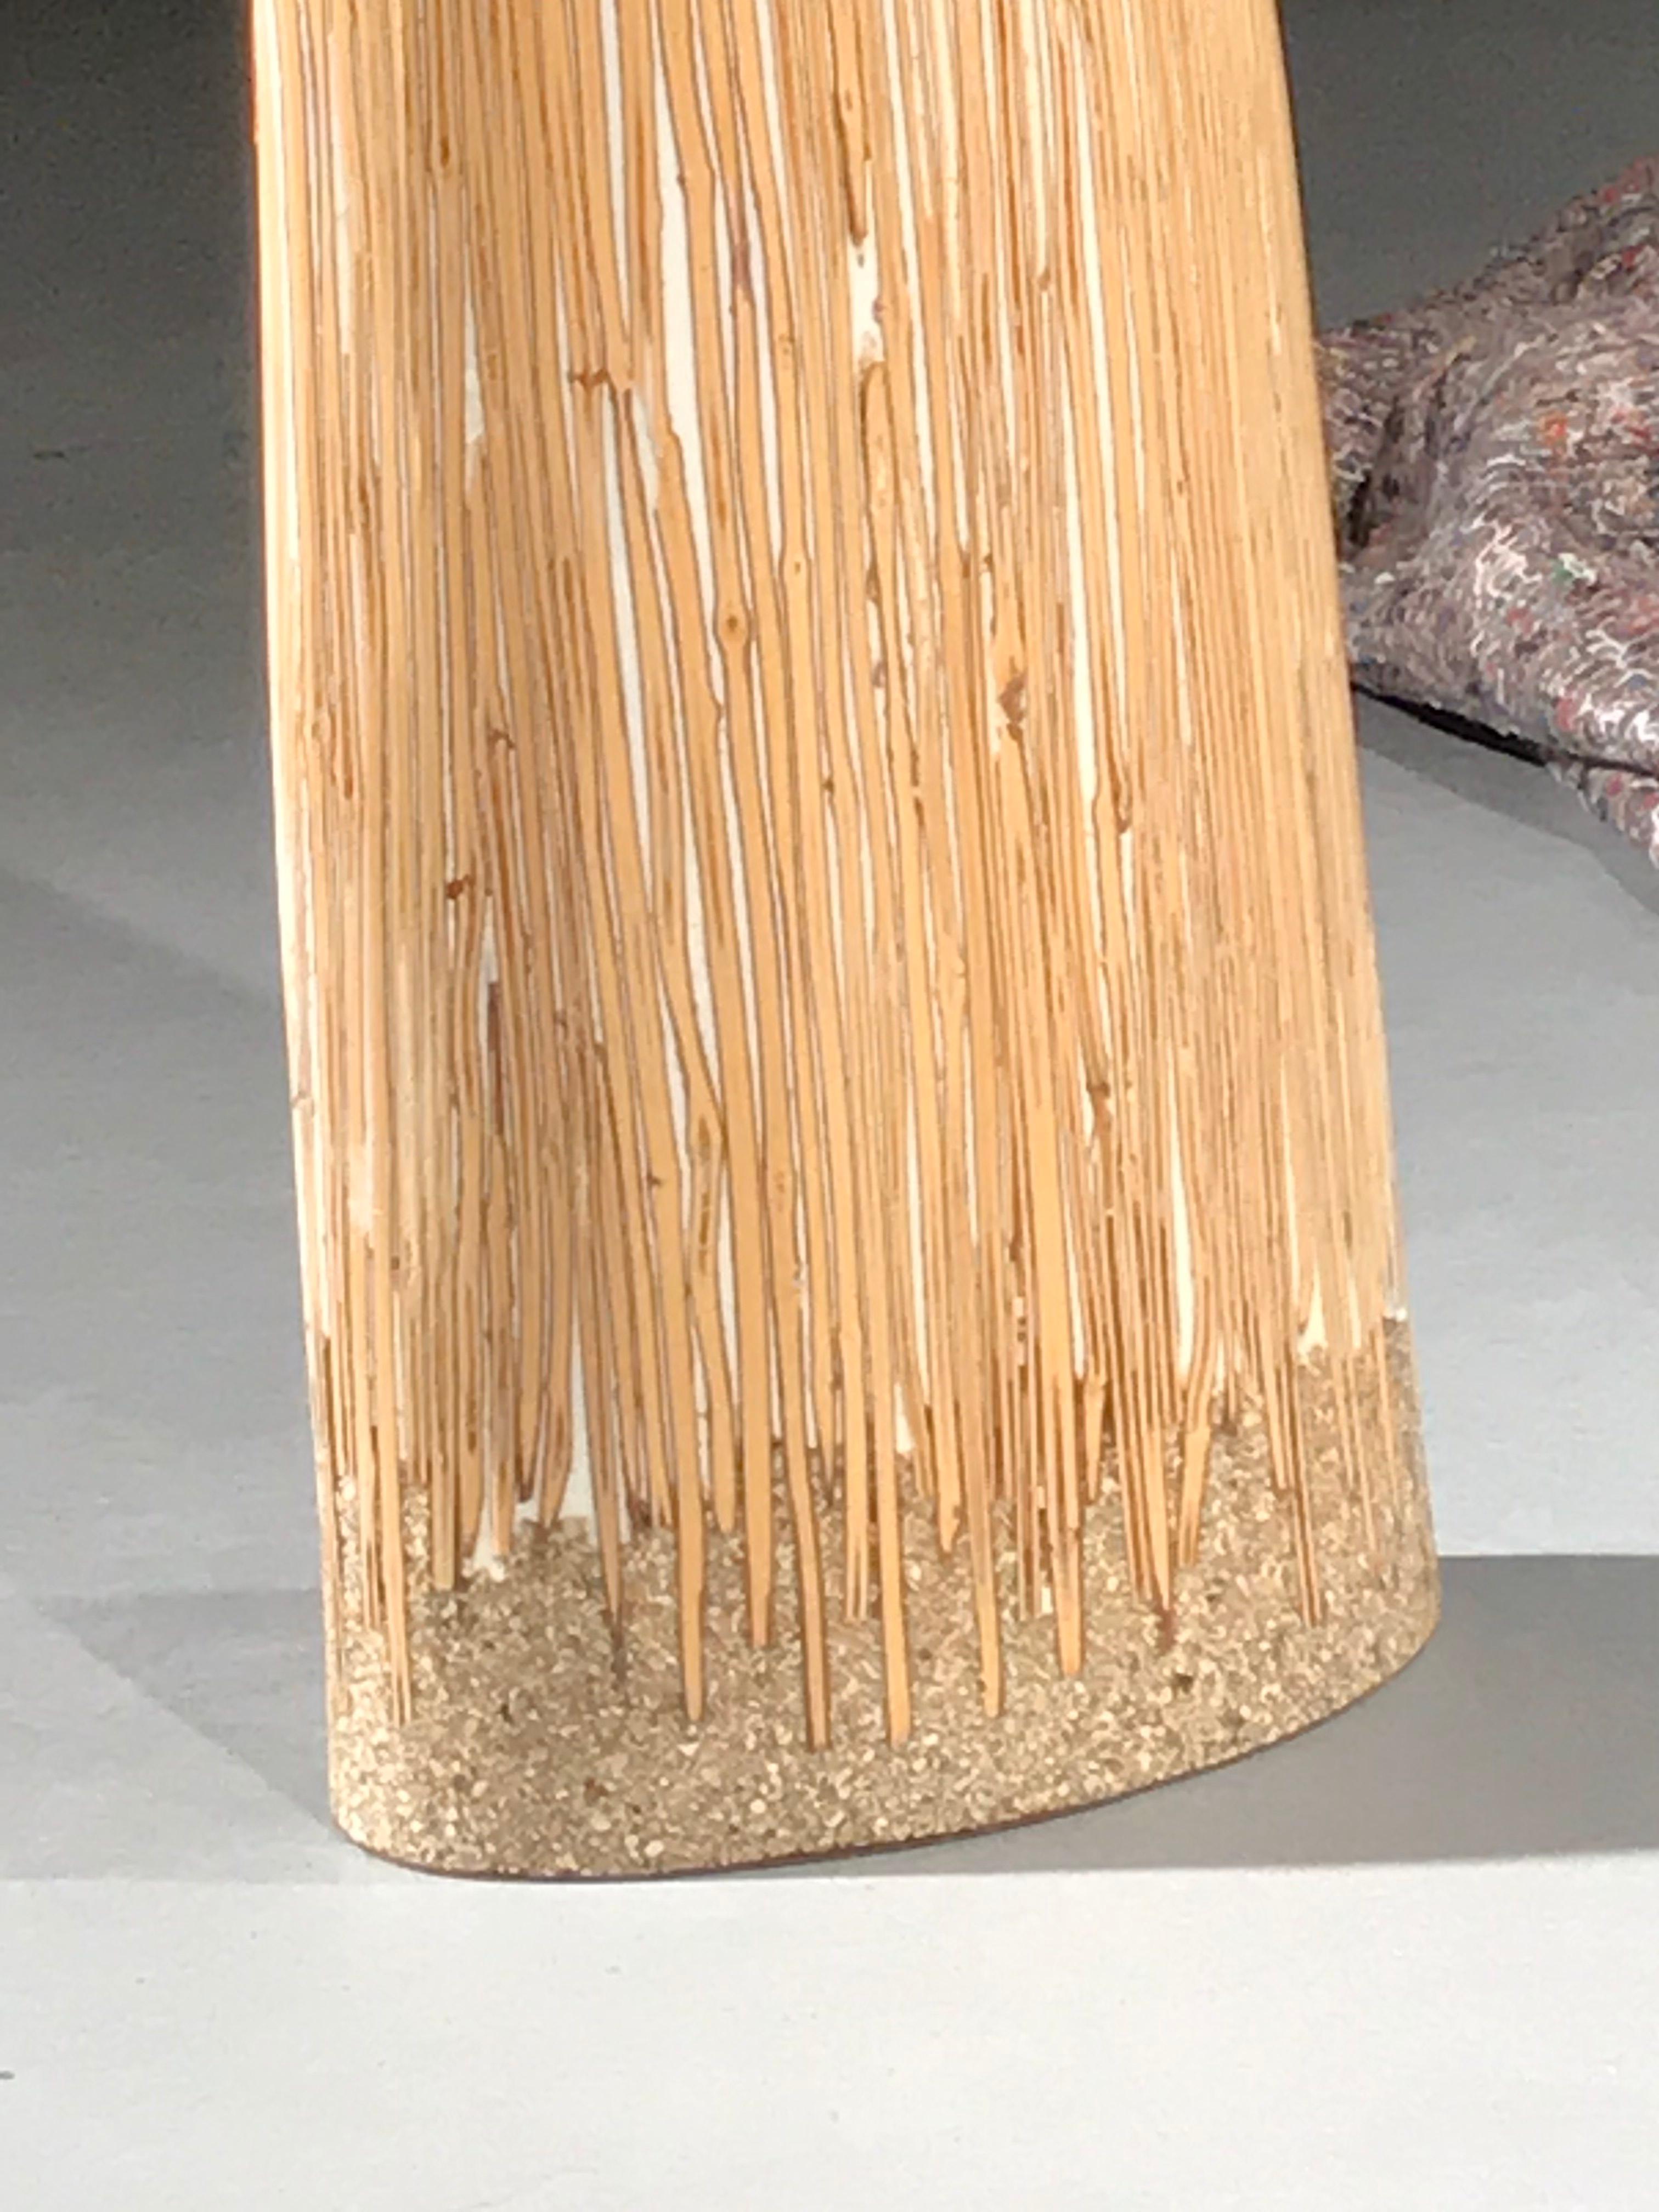 Lusia Robinson: Bamboo sculpture 

- This sculpture is characteristic of Robinson’s work emphasizing materiality within form integrating indigenous materials with modern technology and applications 
- The asymmetrical pared down form of the